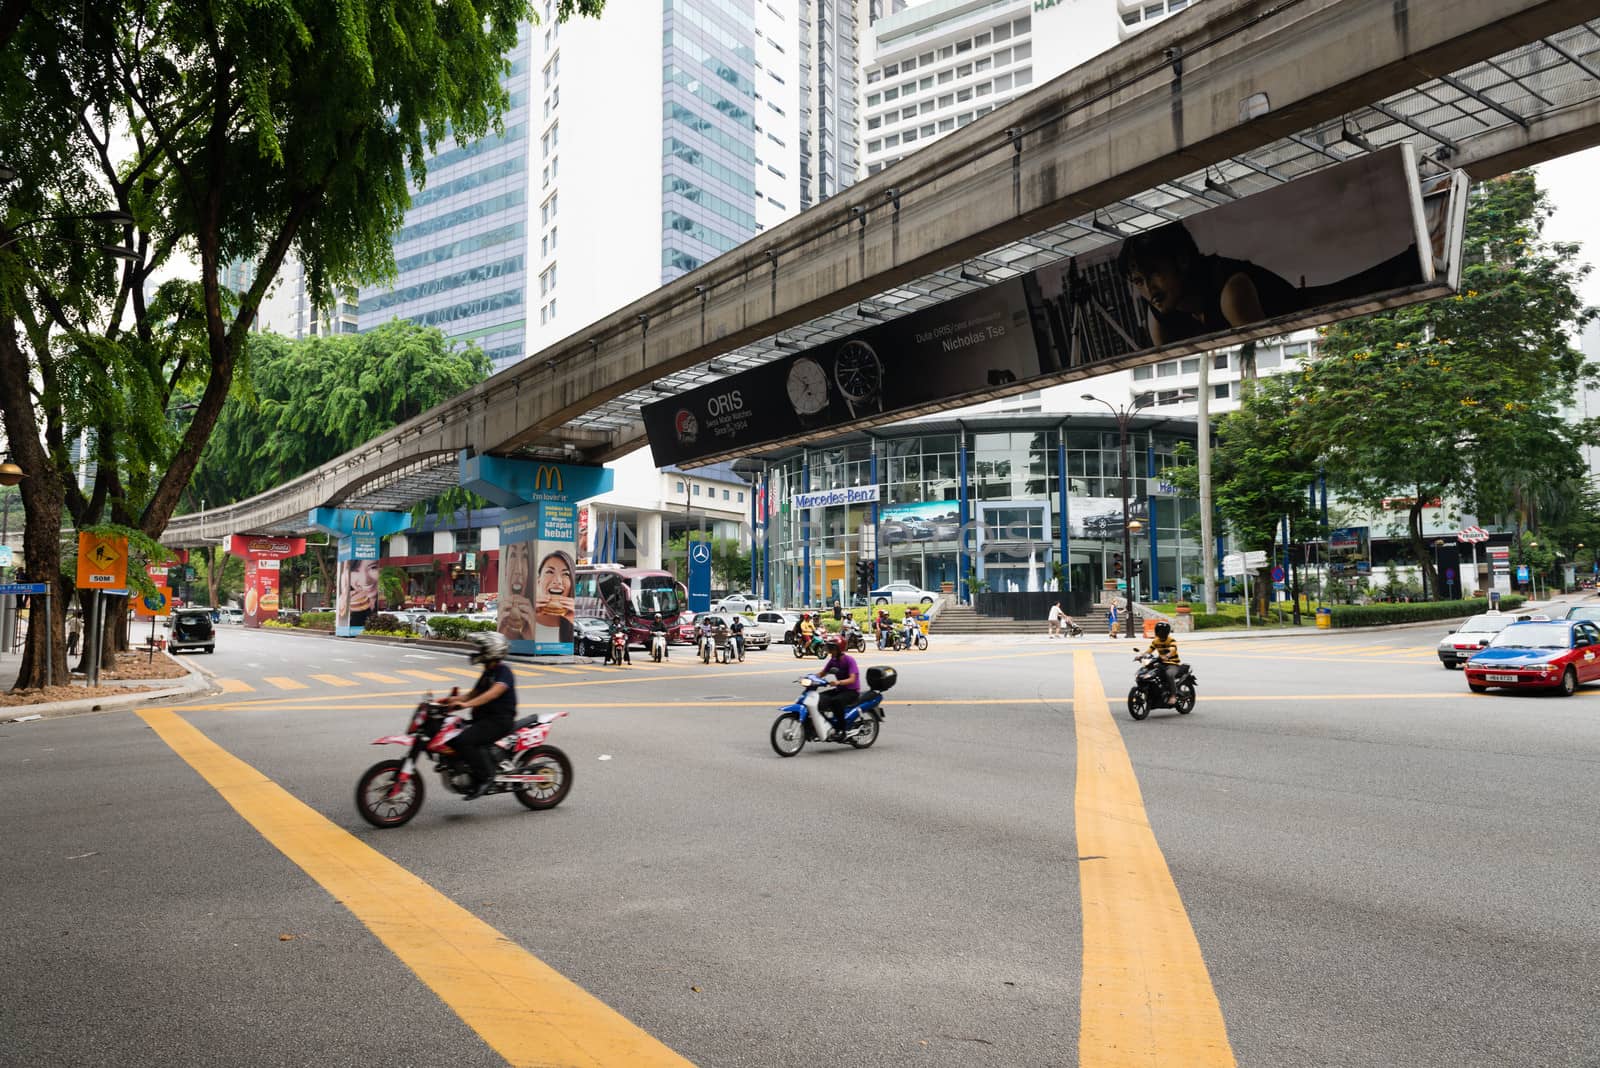 KUALA LUMPUR - JUN 15: City street with motorbikes and  monorail way under road on Jun 15, 2013 in Kuala Lumpur, Malaysia. Kuala Lumpur is served by three separate rail systems with underground, elevated or at-grade lines.